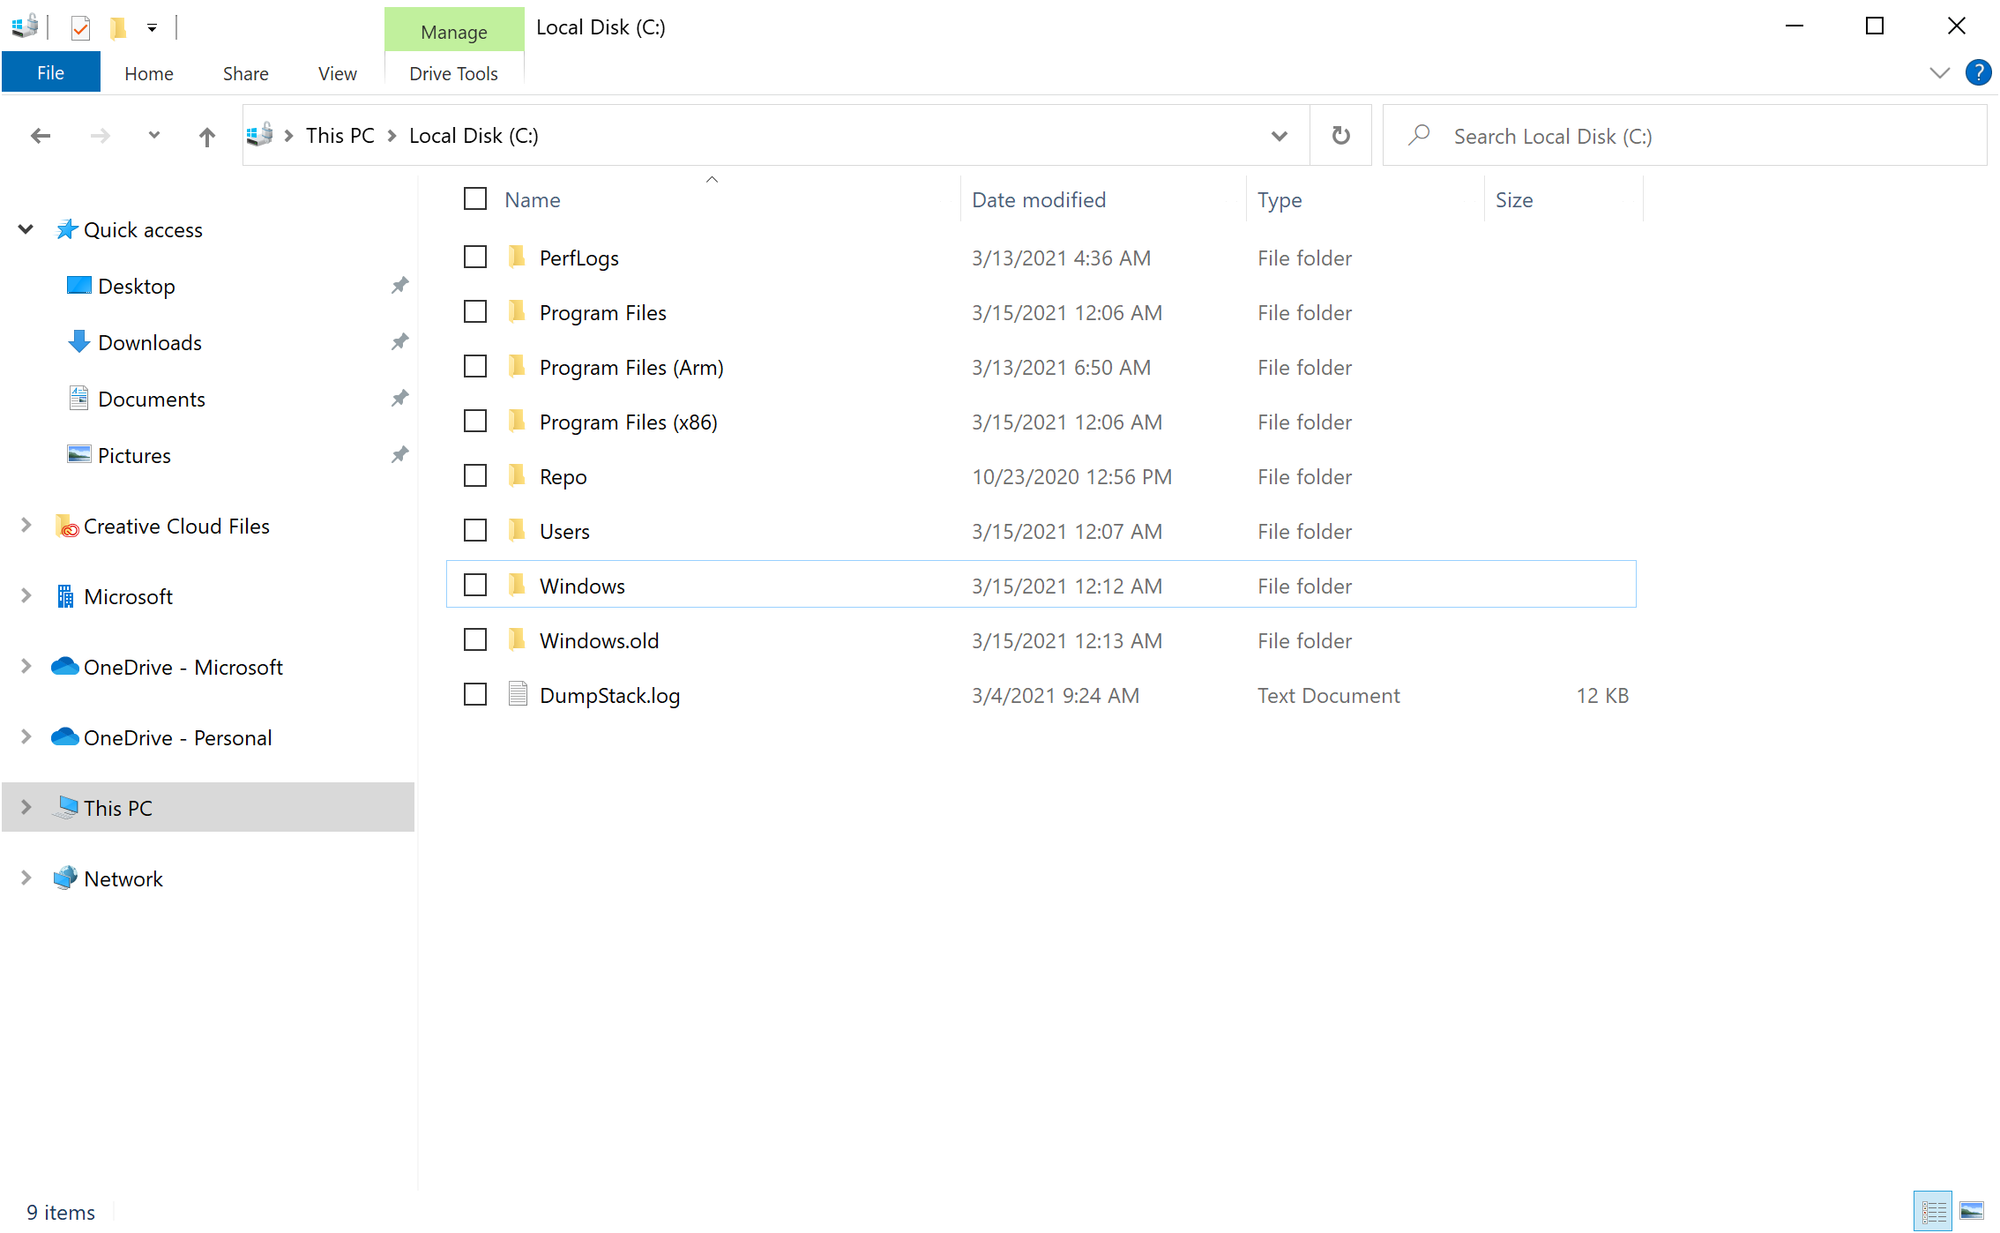 Windows 10 Insider Preview Dev Build 21337 (RS_PRERELEASE) - March 17 file-explorer-layout-update.png